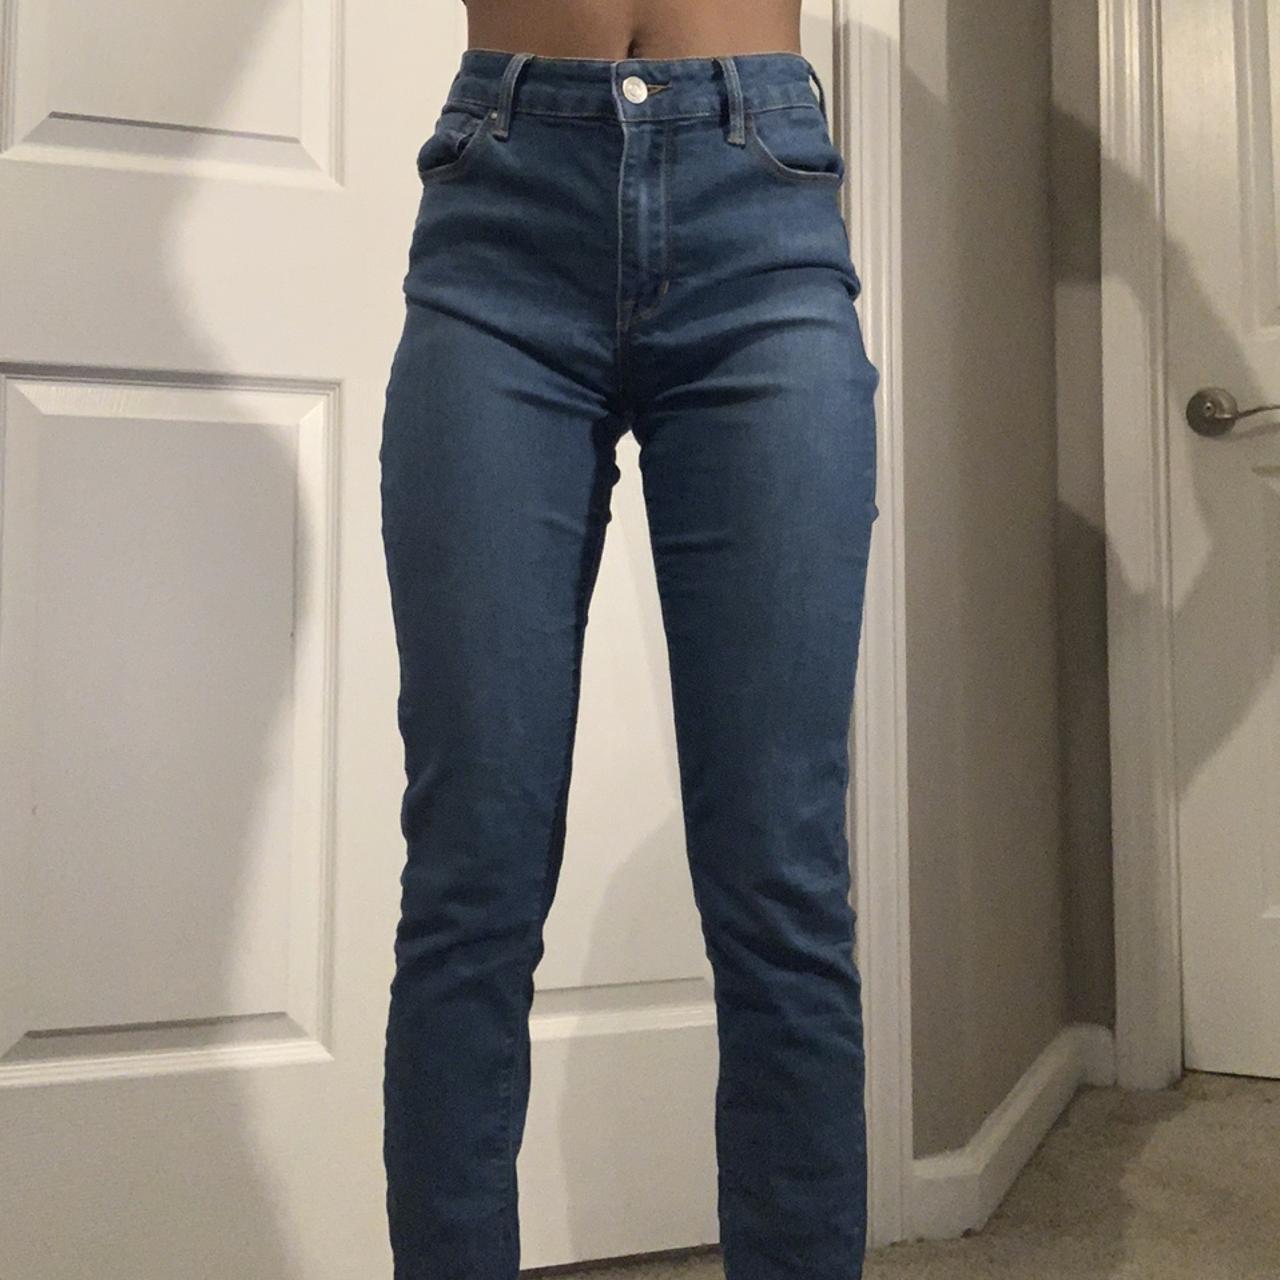 Super high rise skinniest jeans from pacsun... - Depop